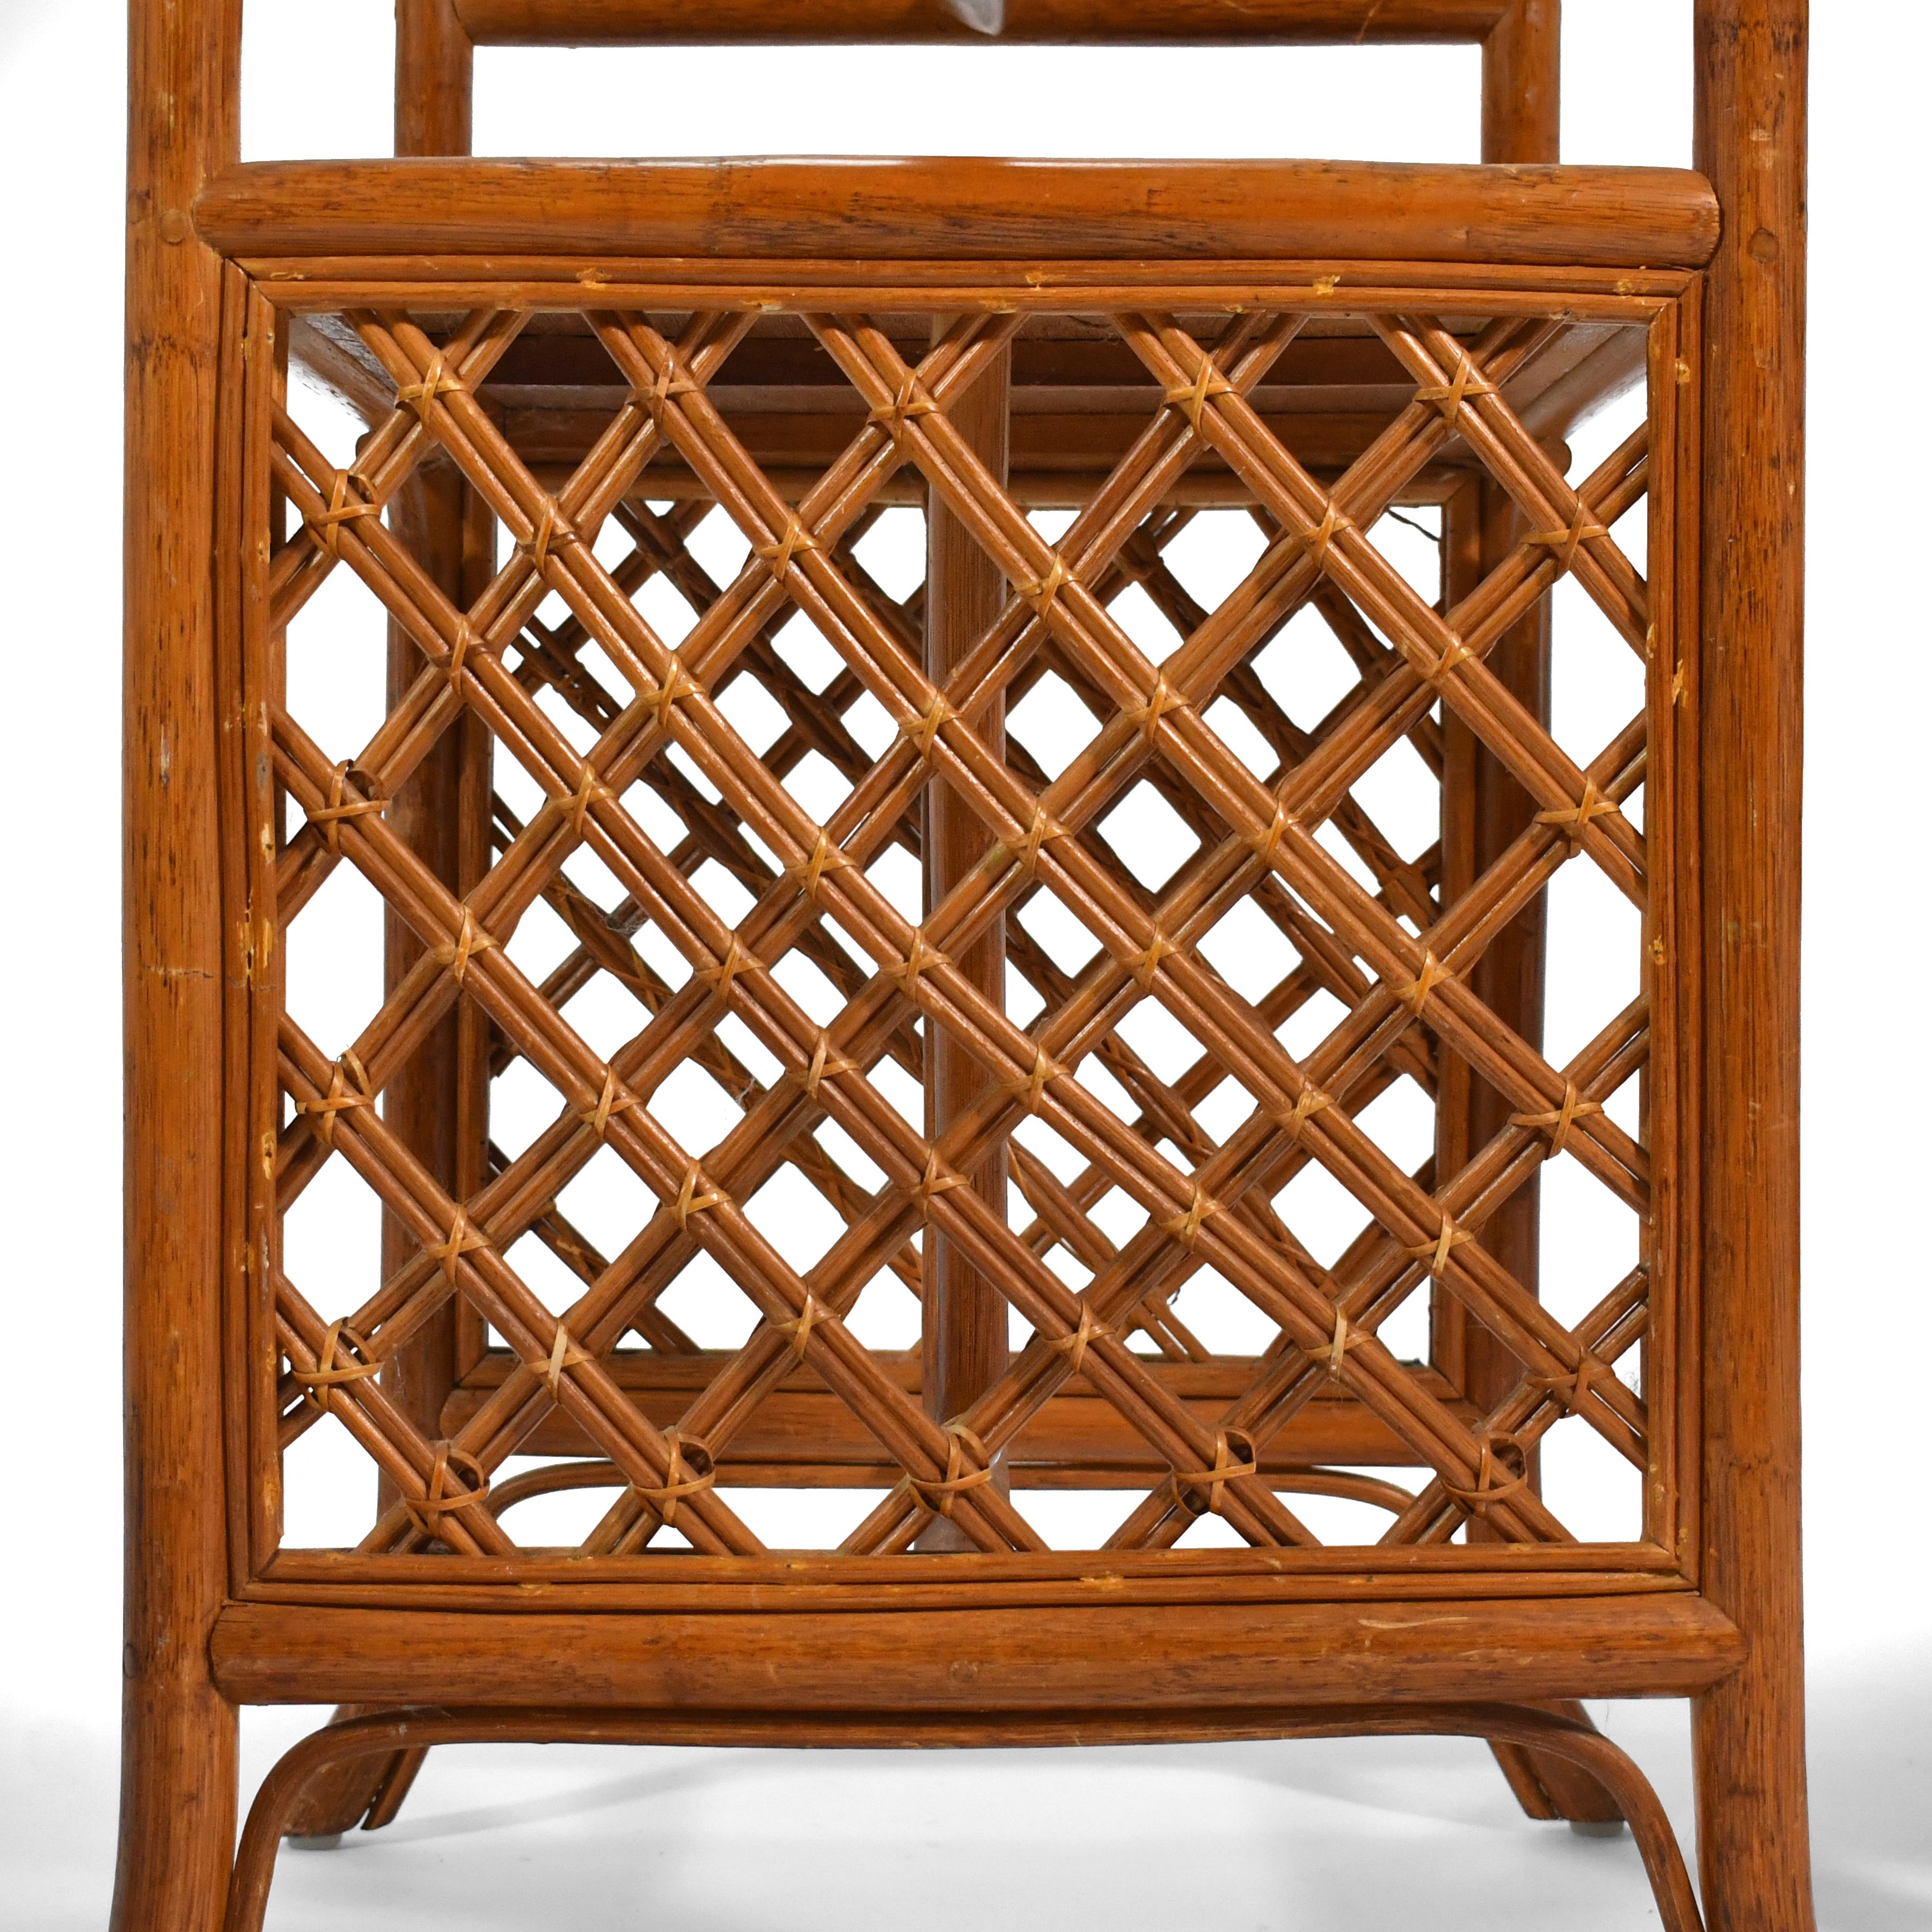 Indonesian Rattan & Cane Game Table and Chair Set